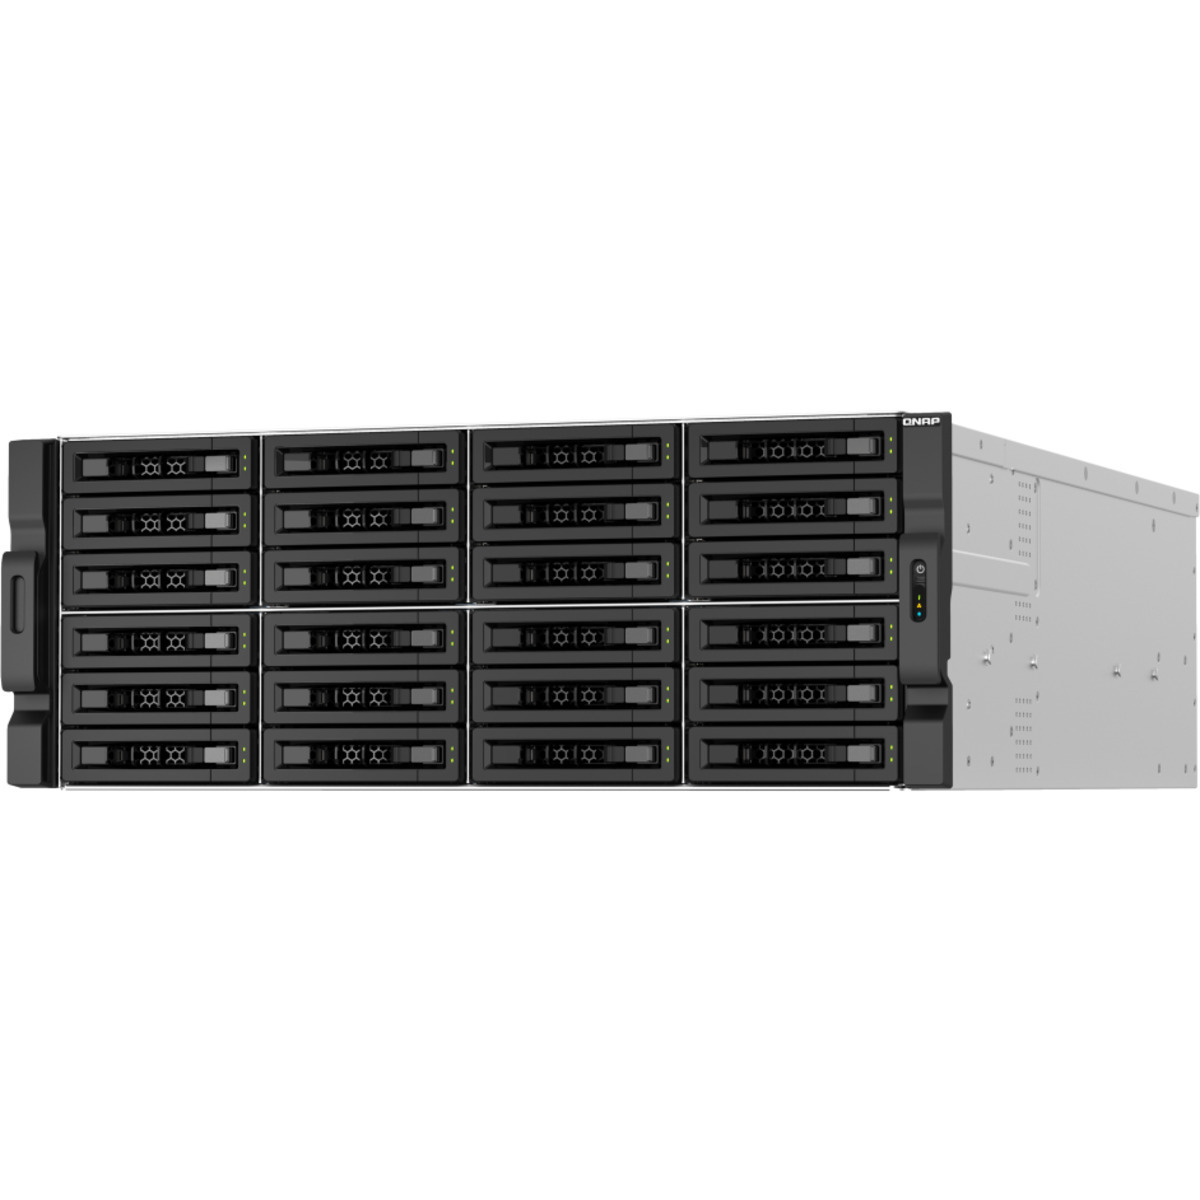 QNAP TS-h3087XU-RP E-2378 QuTS hero Edition 138tb 24+6-Bay RackMount Large Business / Enterprise NAS - Network Attached Storage Device 23x6tb Seagate IronWolf Pro ST6000NT001 3.5 7200rpm SATA 6Gb/s HDD NAS Class Drives Installed - Burn-In Tested TS-h3087XU-RP E-2378 QuTS hero Edition